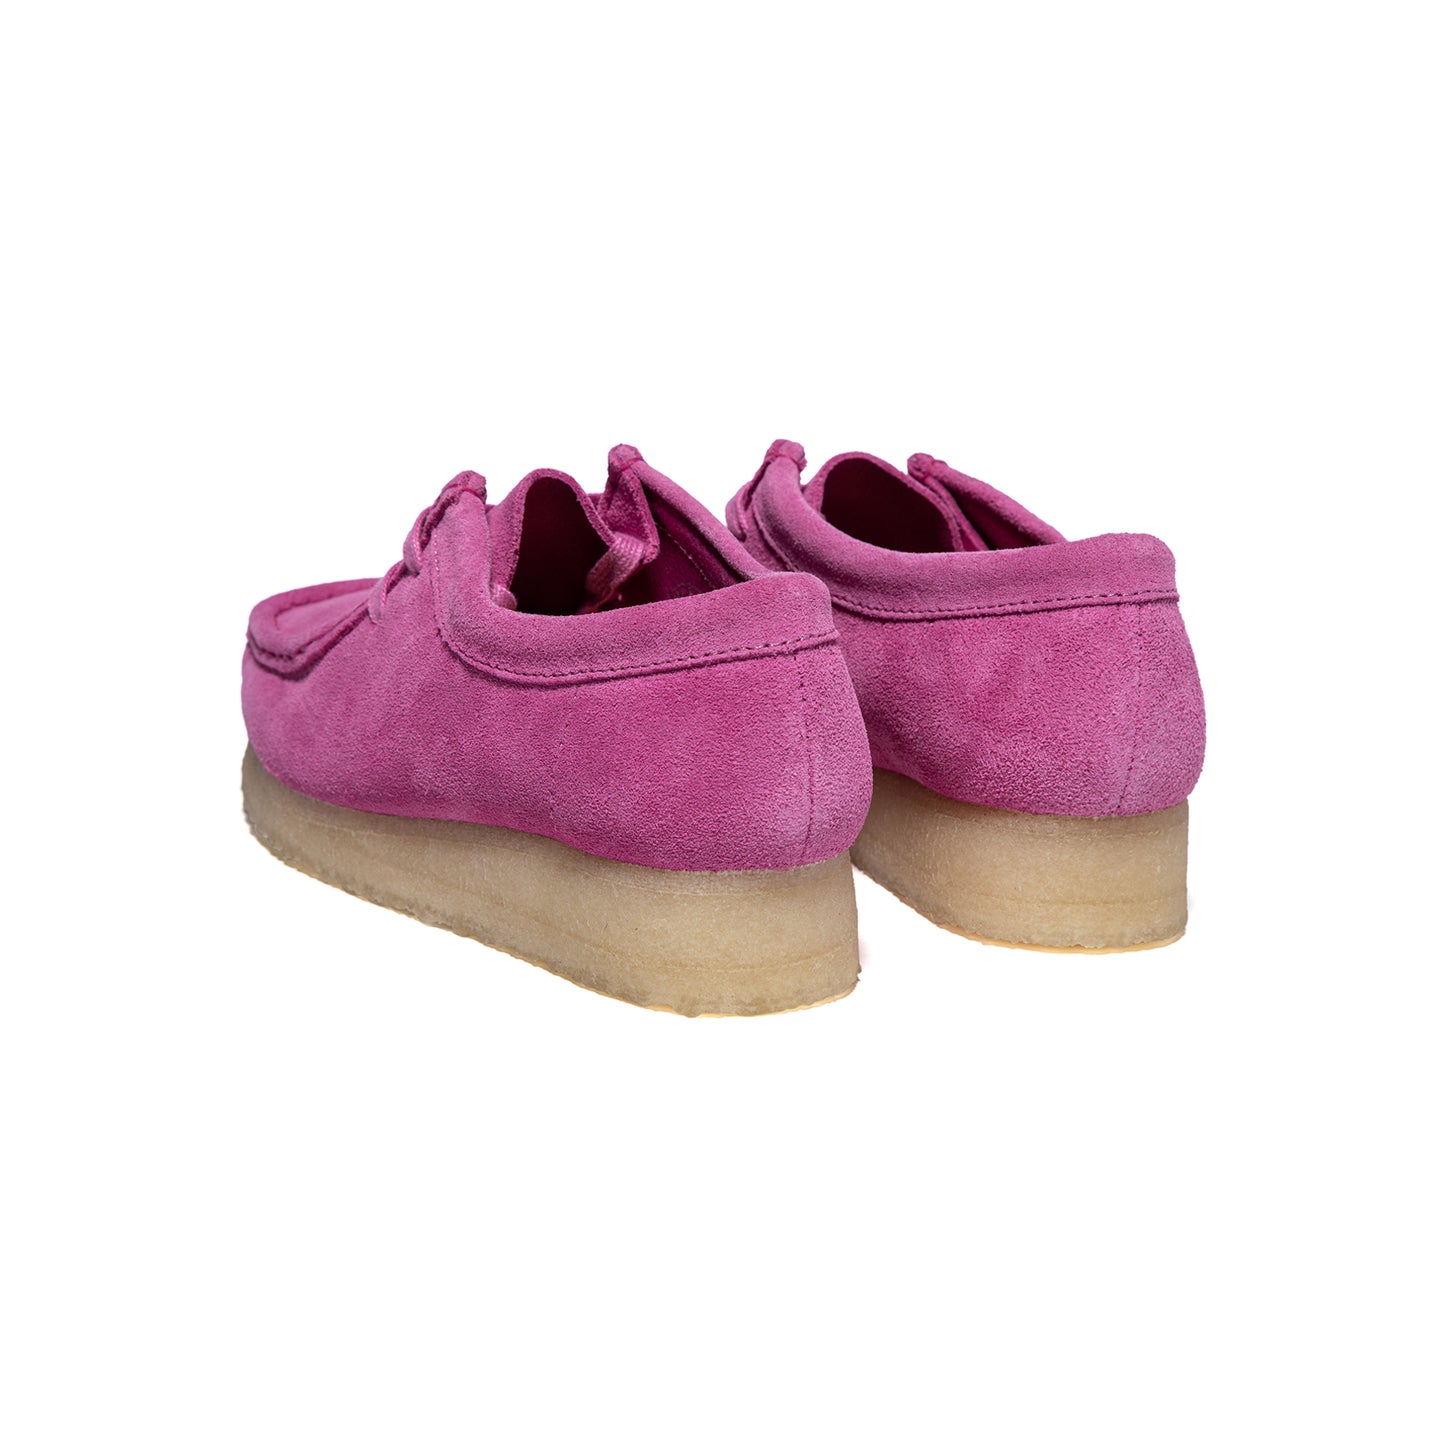 Clarks Wallabee (Pink Suede)